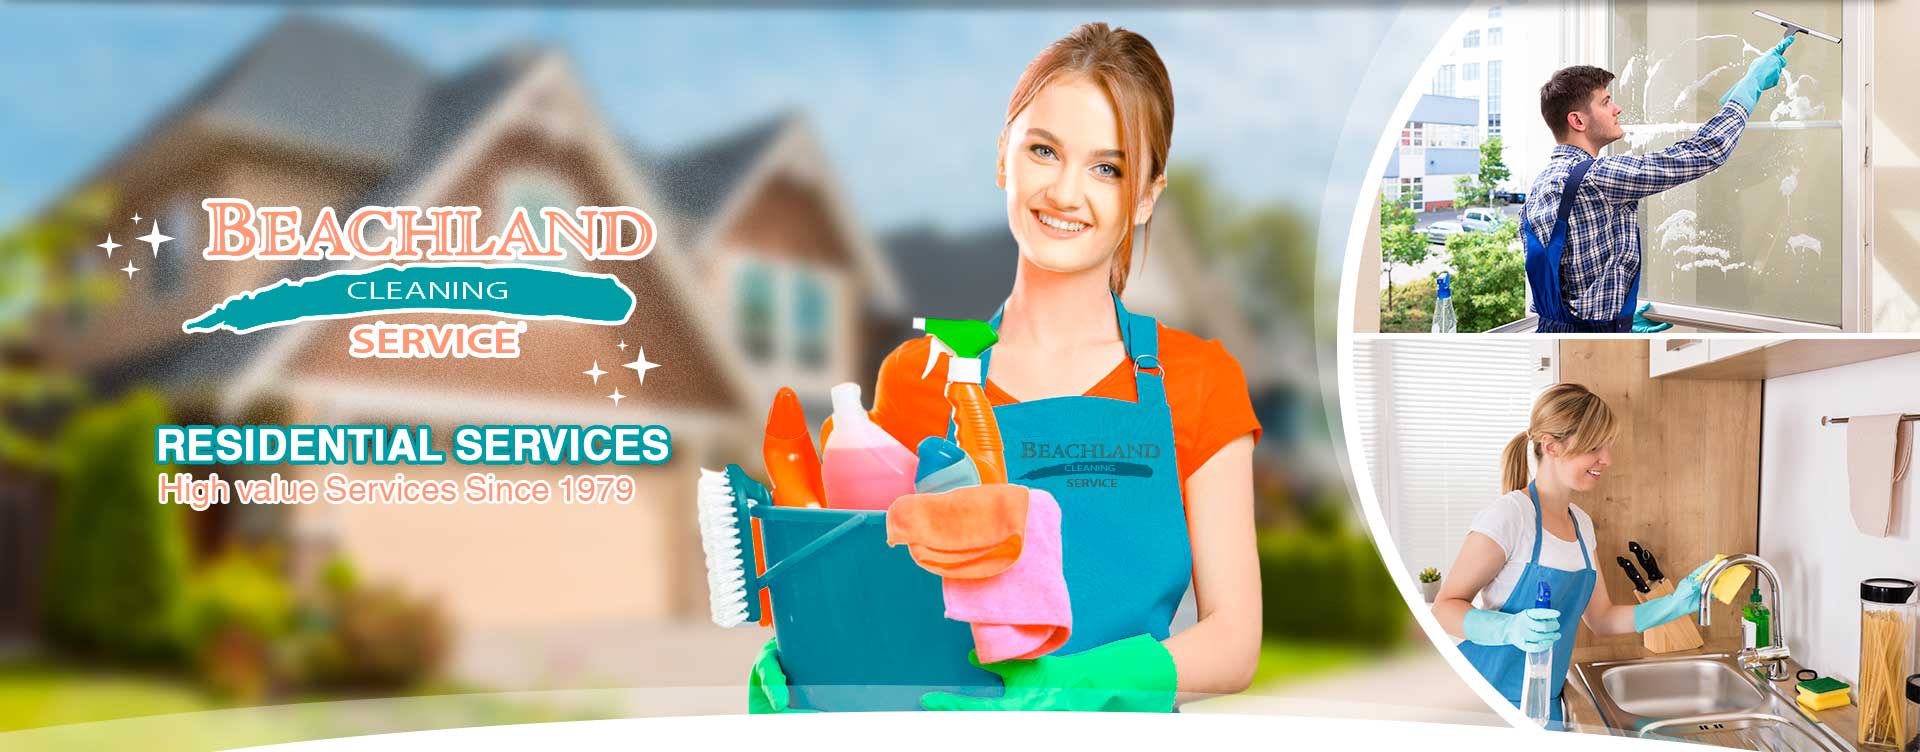 General Office Cleaning Services in Saint Lucie County